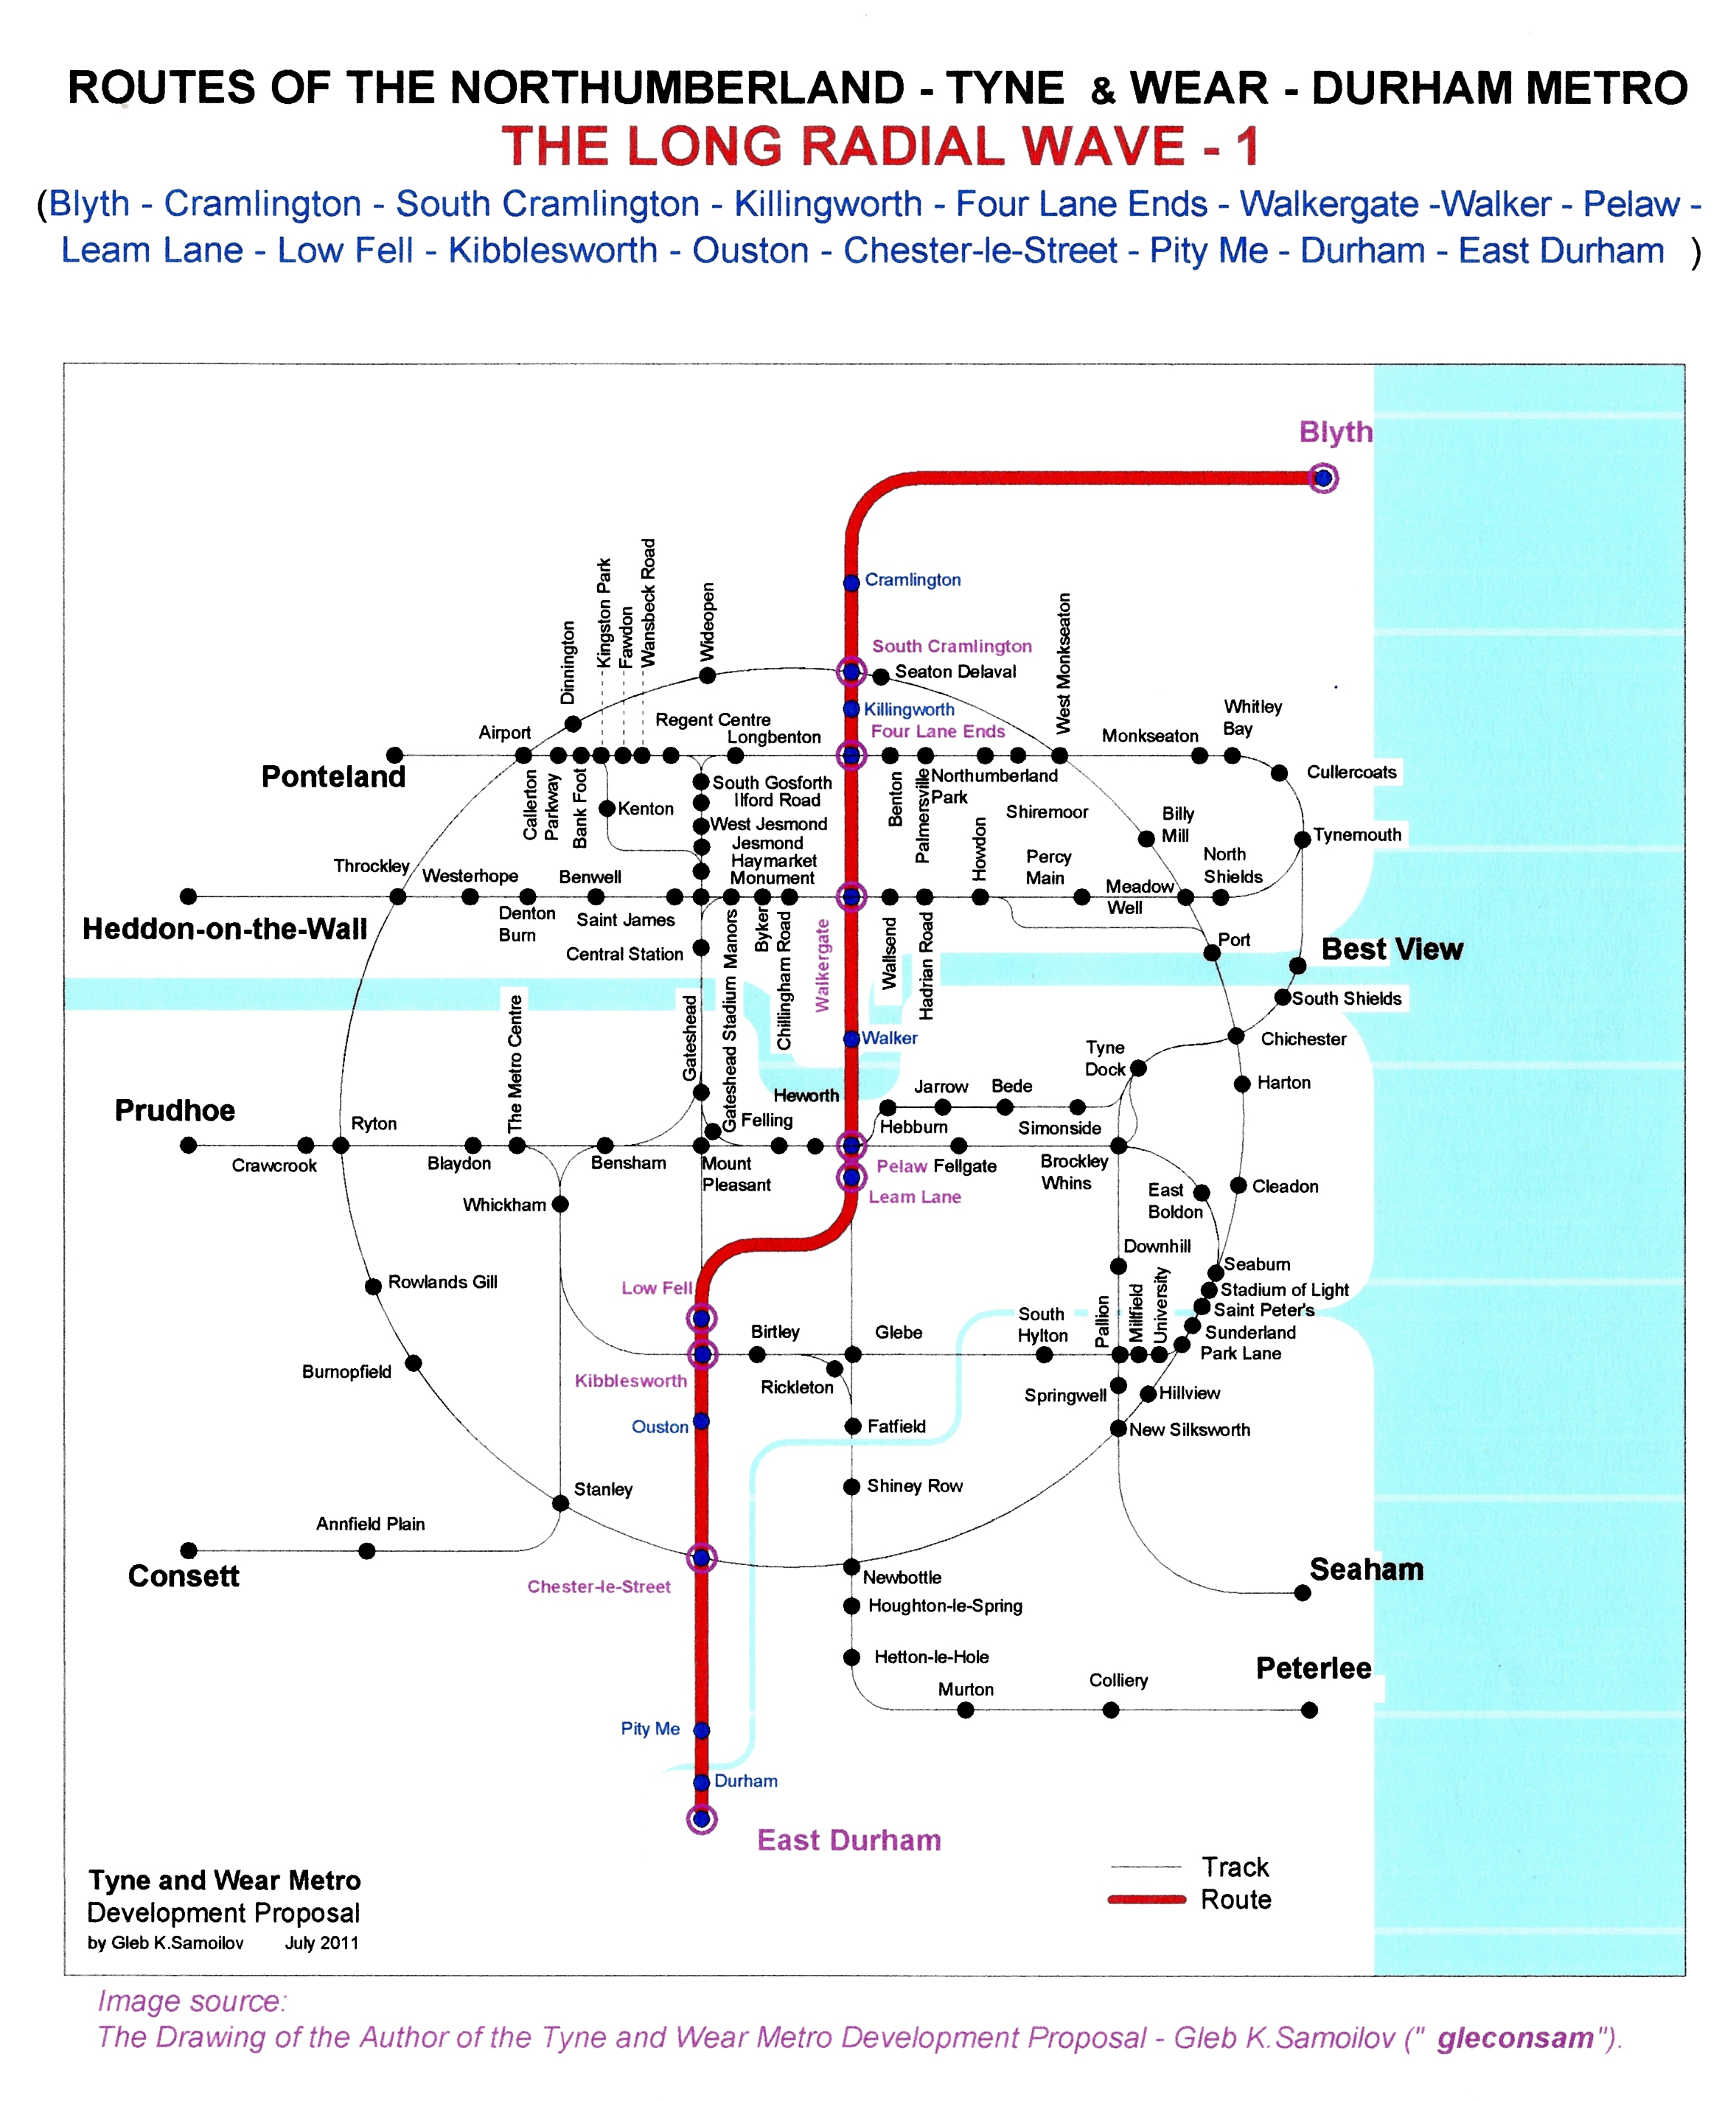 The Tyne and Wear Metro. Developed network routes. The LONG RADIAL WAVE -1